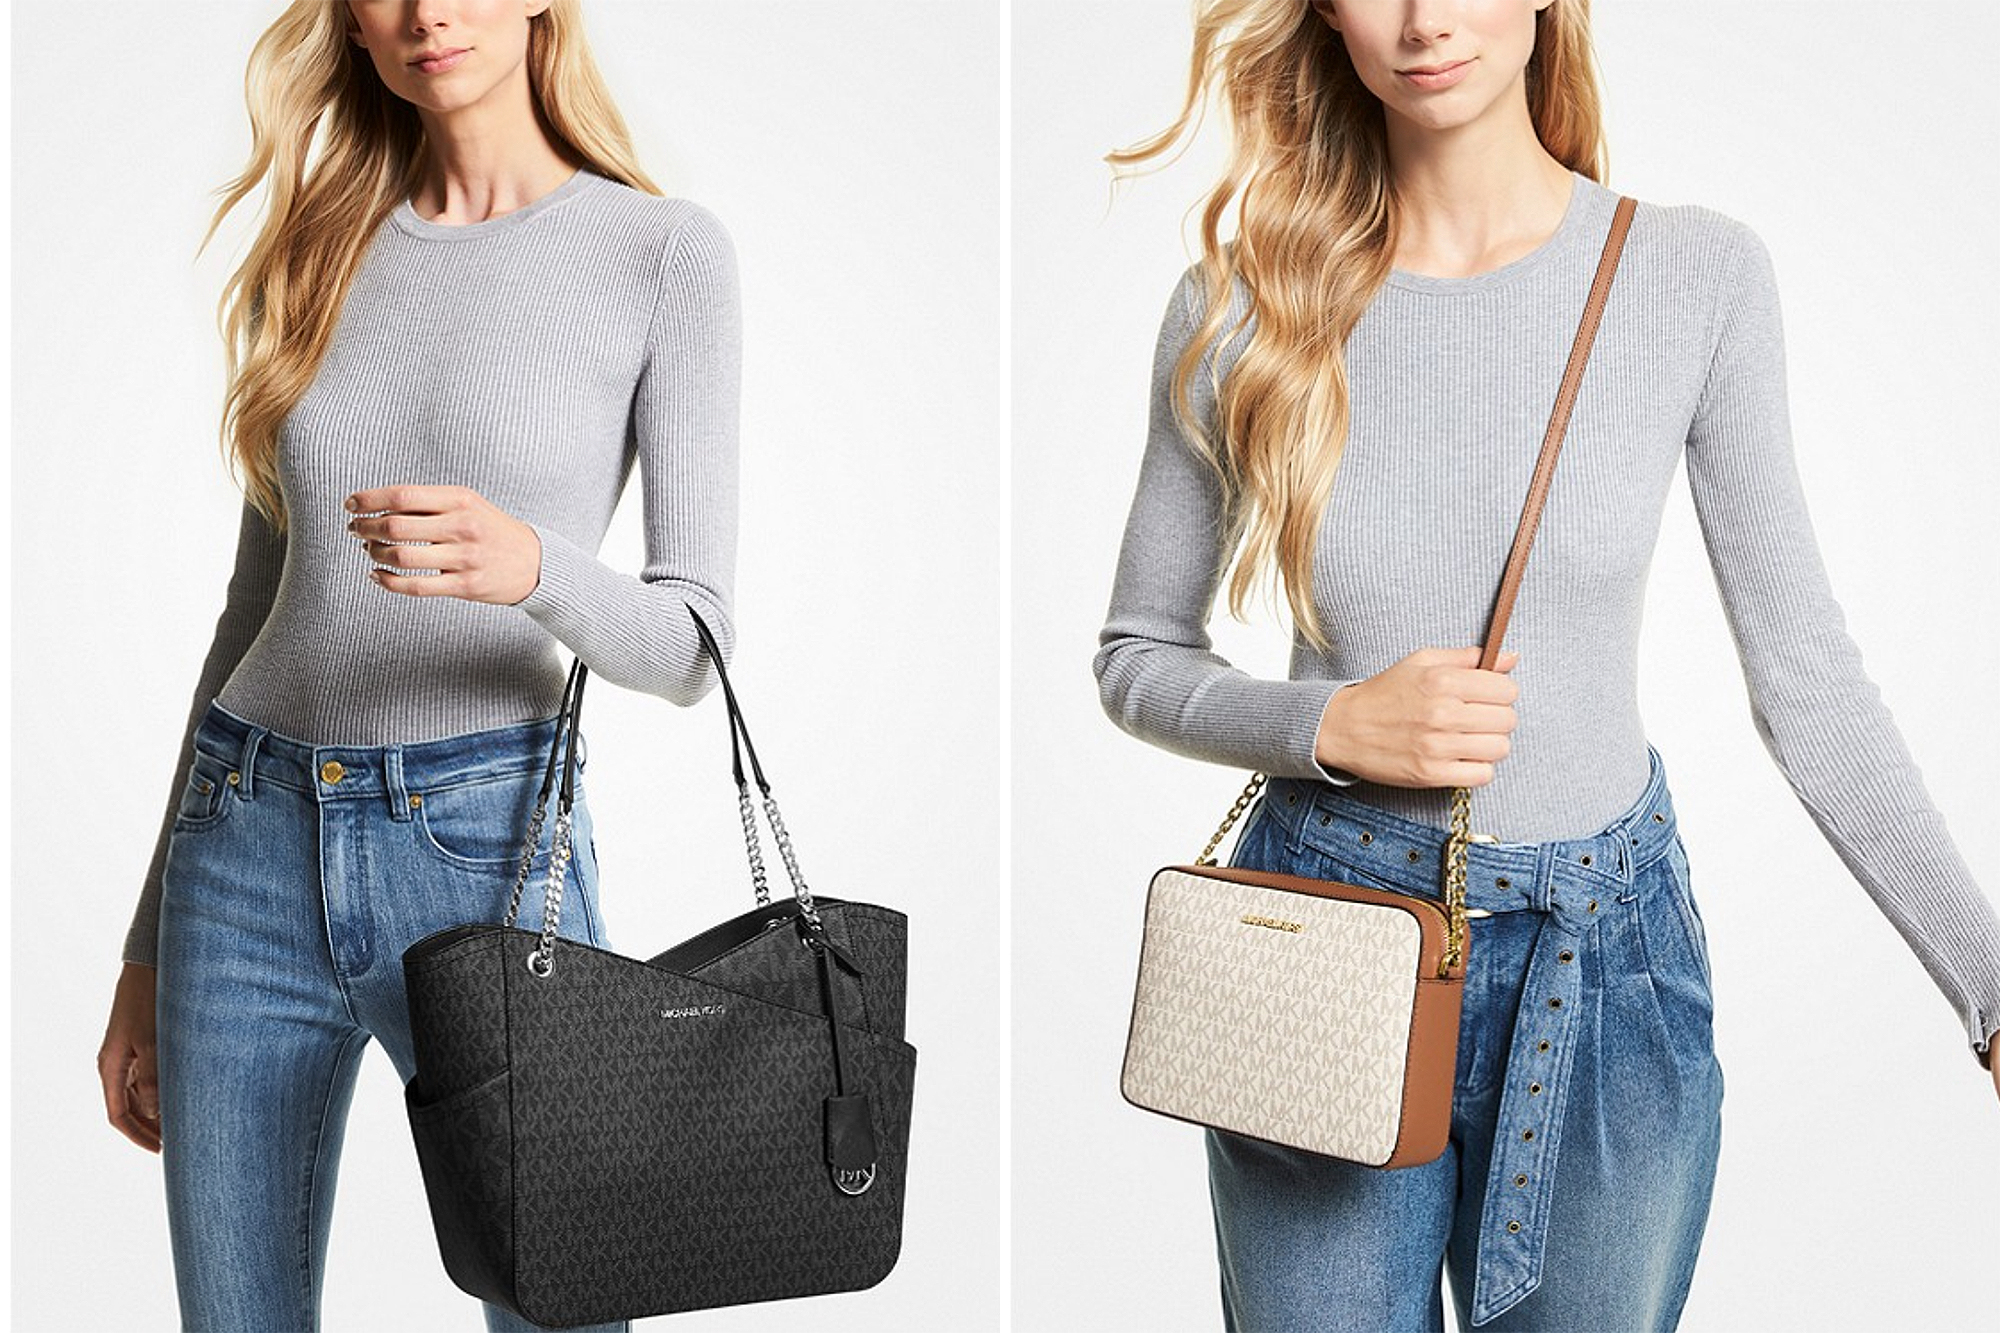 Michael Kors Sale  MK Bags Clearance  House Of Fraser